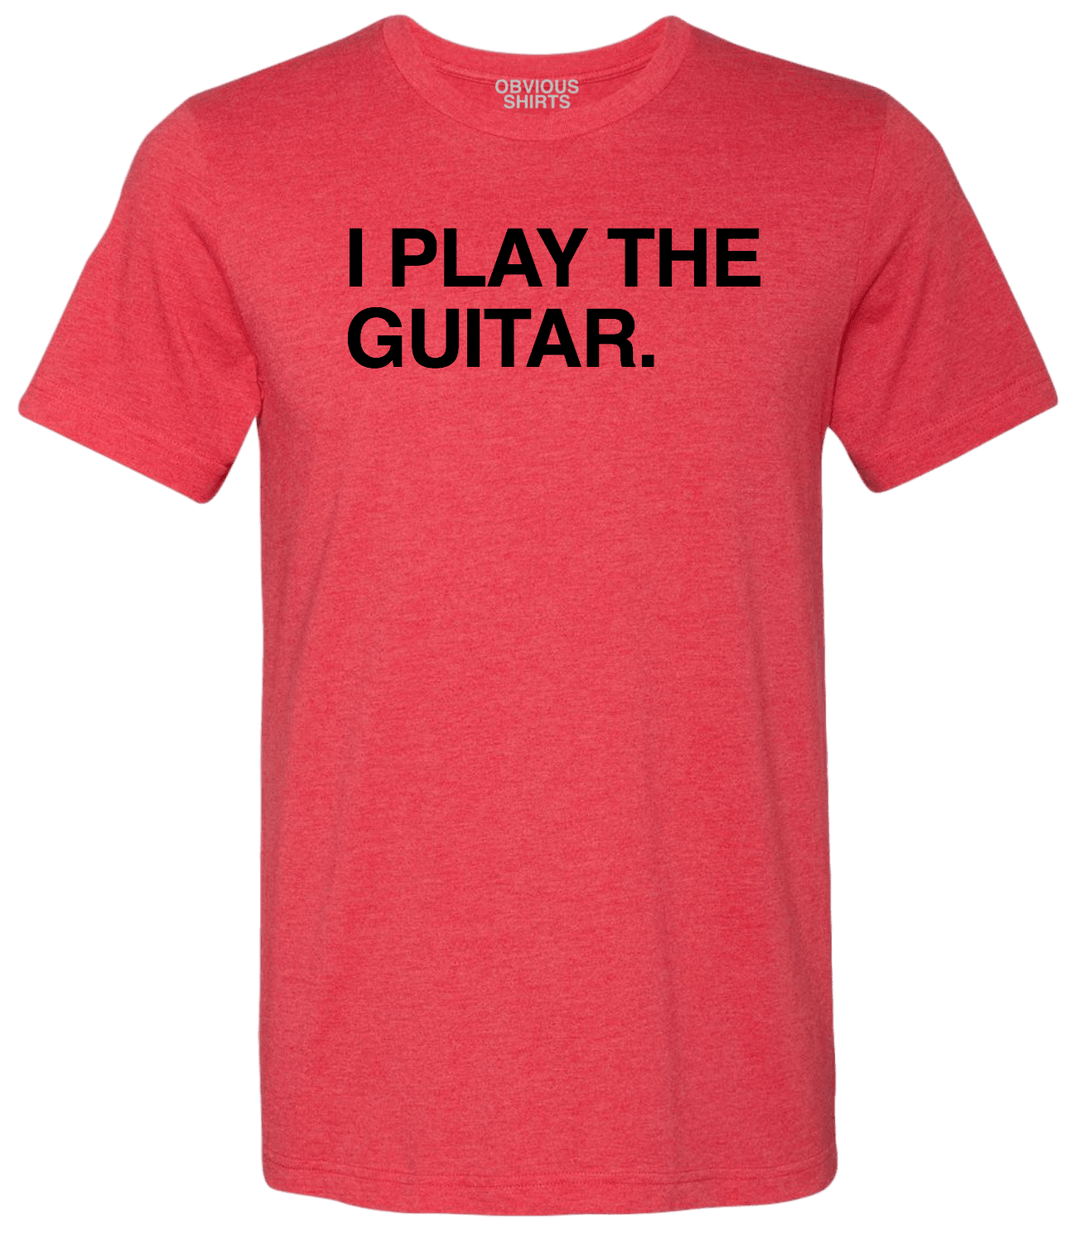 I PLAY THE GUITAR. - OBVIOUS SHIRTS.